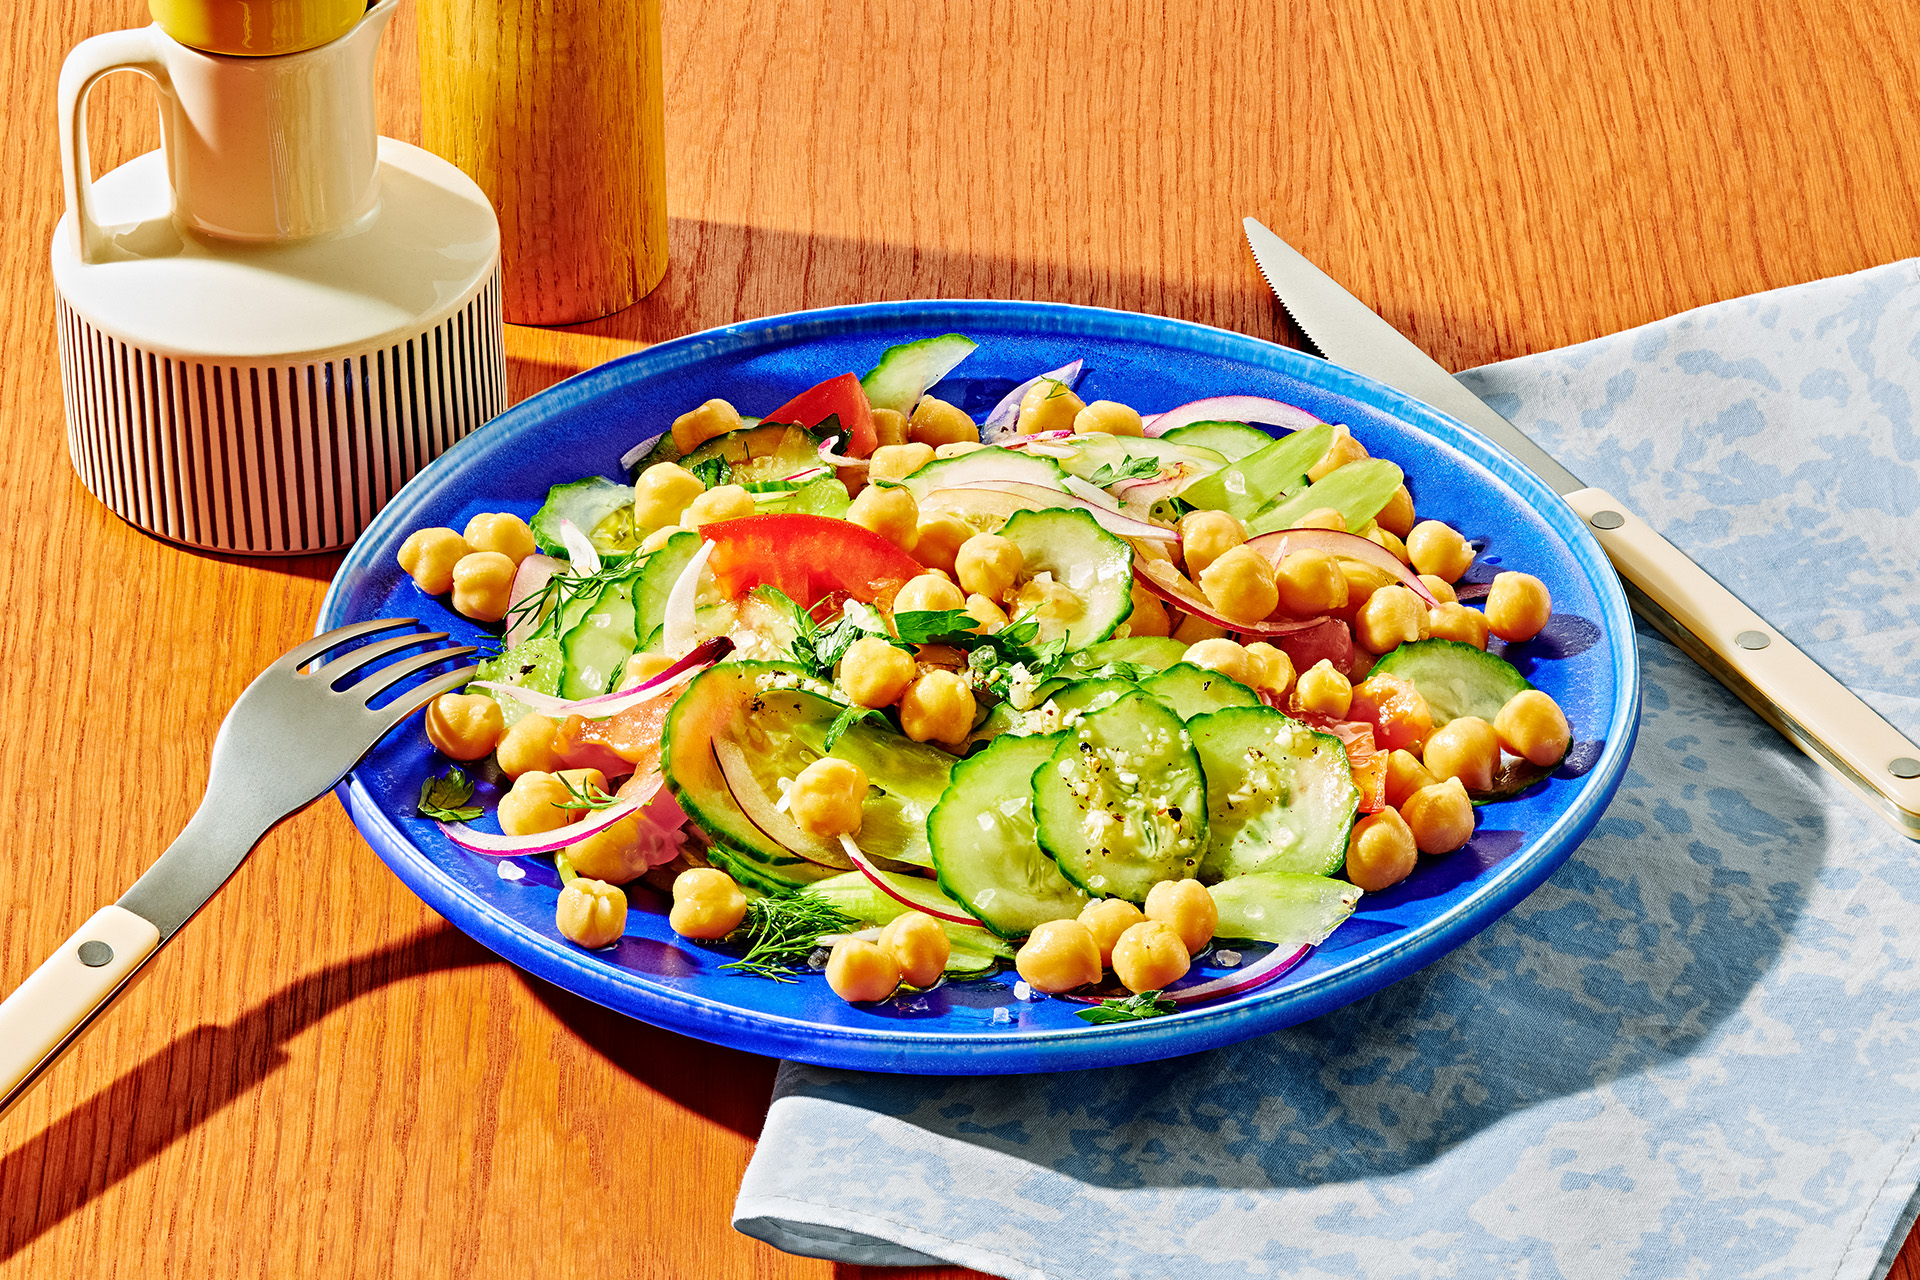 Salad with pickles, garbanzo beans, red onion and herbs in a blue bowl